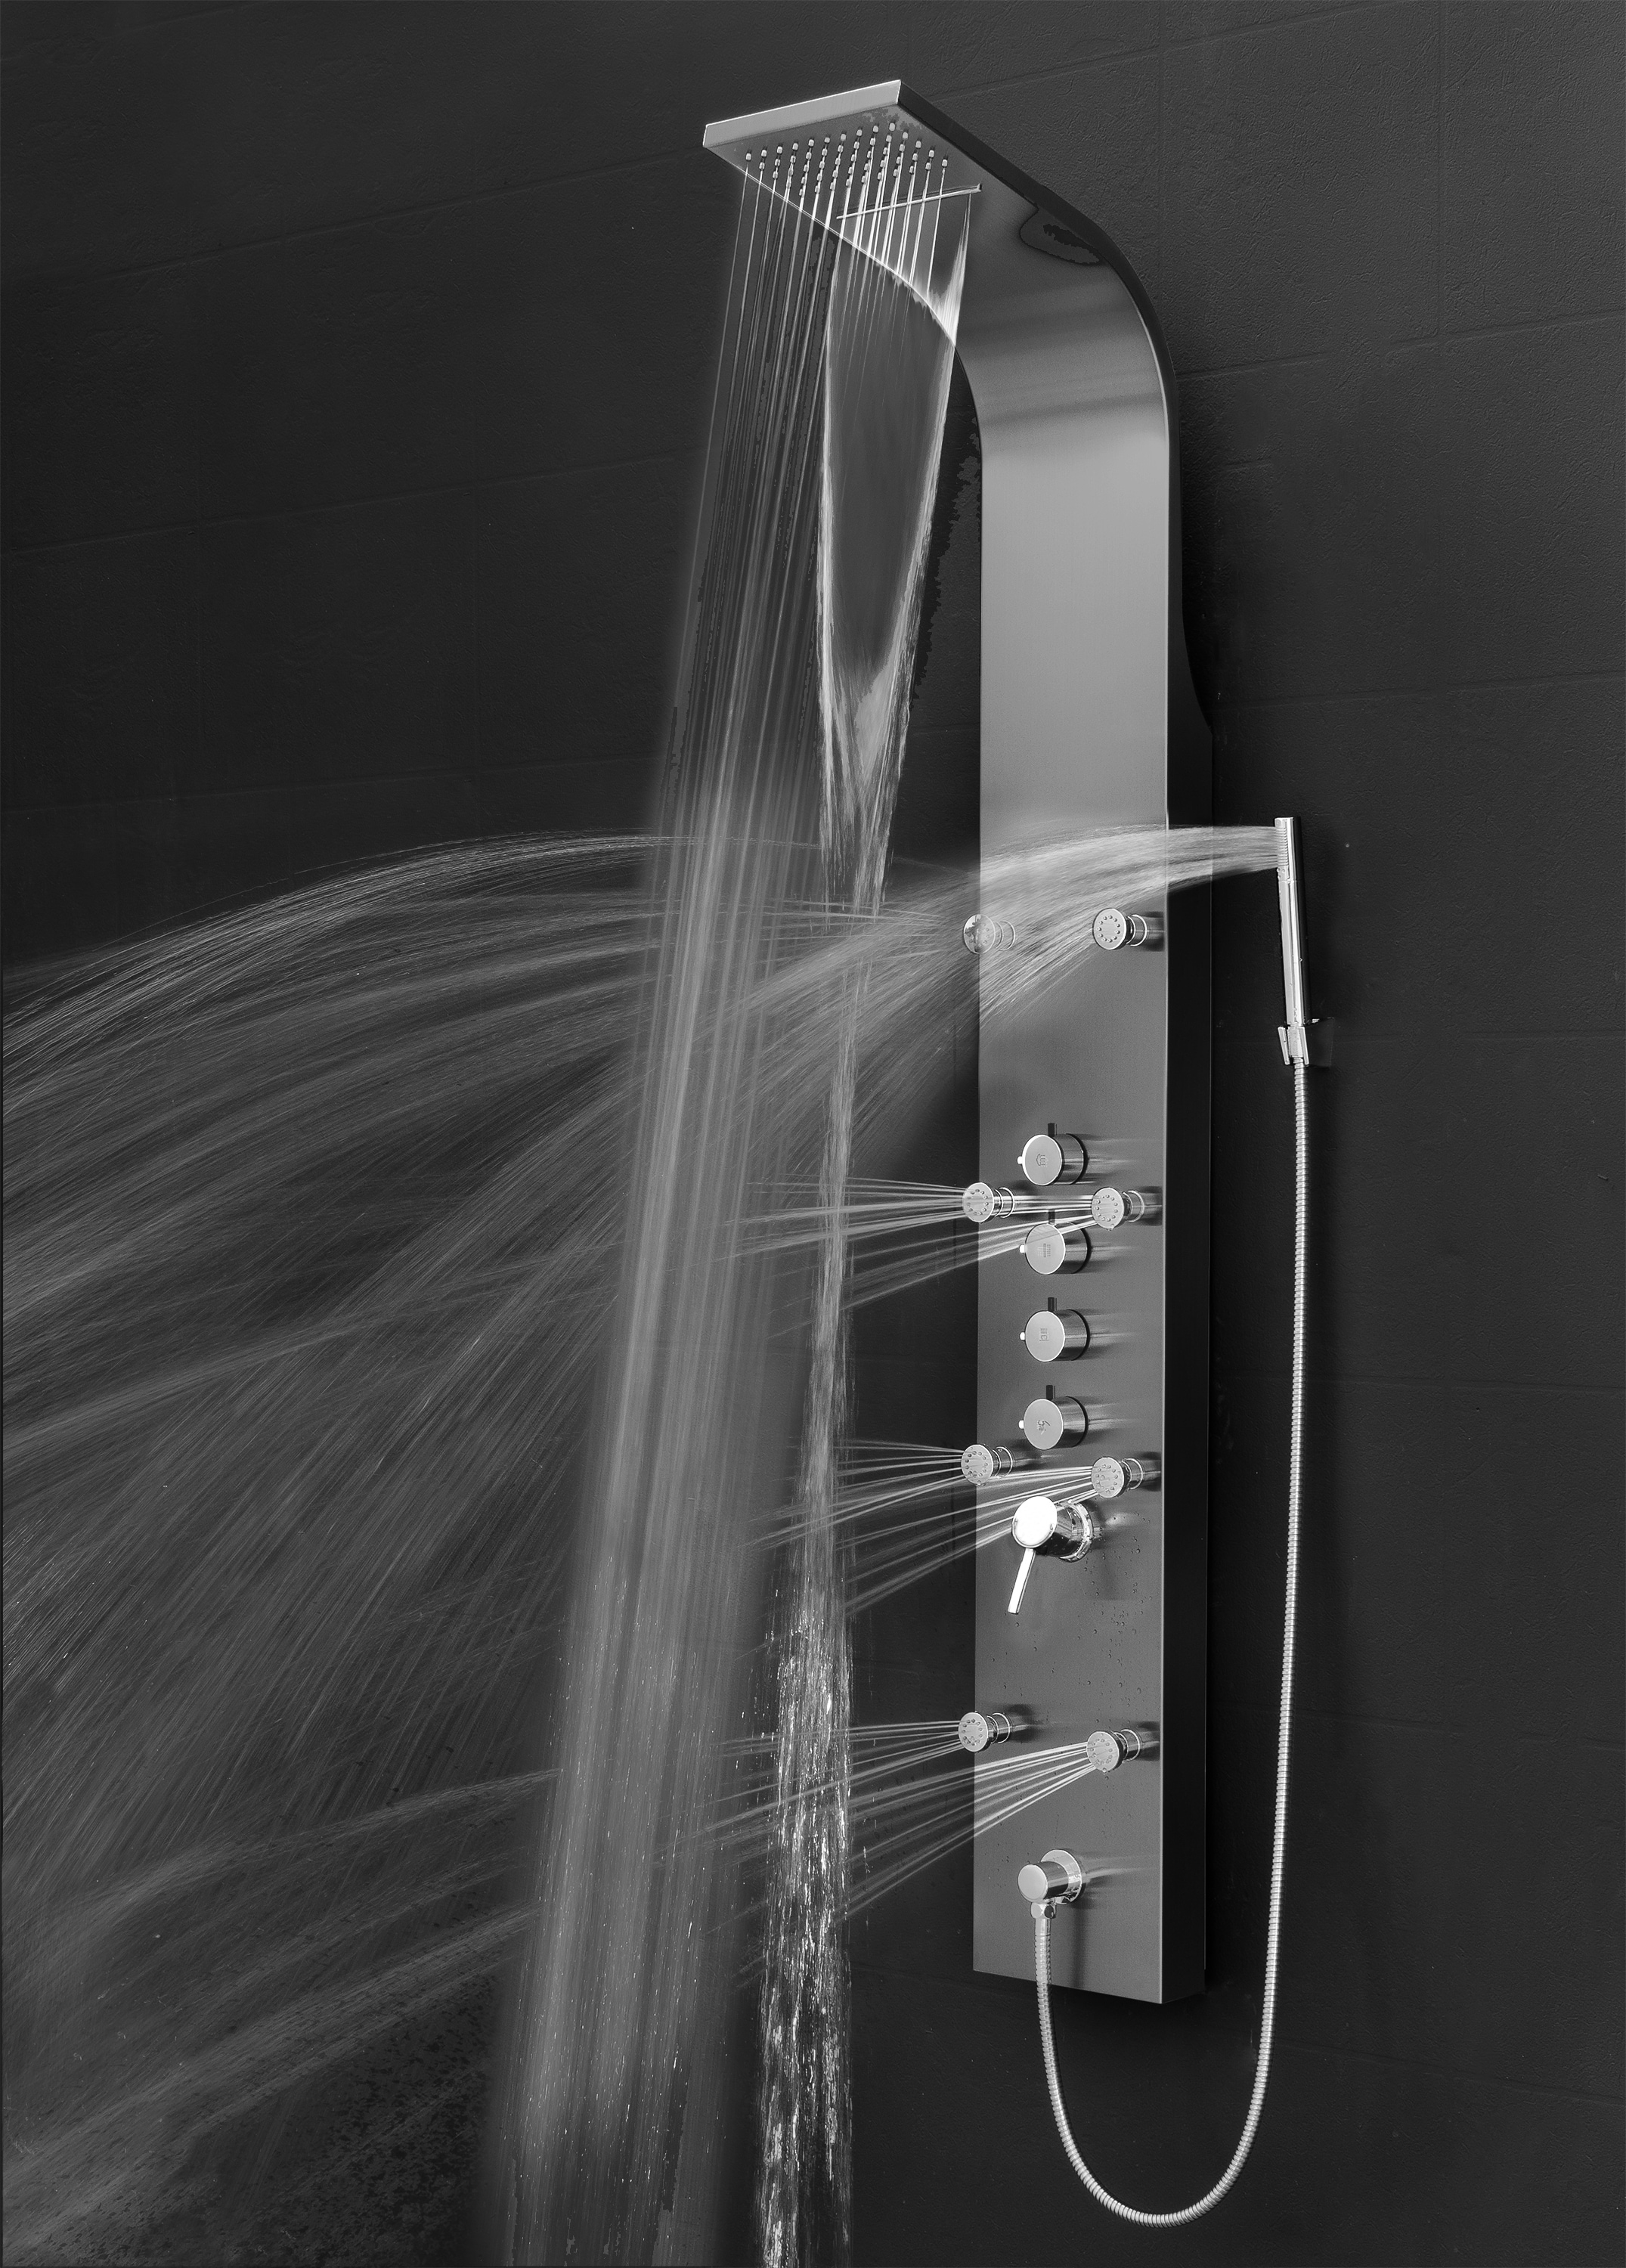 Details about   65 in Adjustable Rainfall Shower 8-Jet Shower Panel System in Stainless Steel 